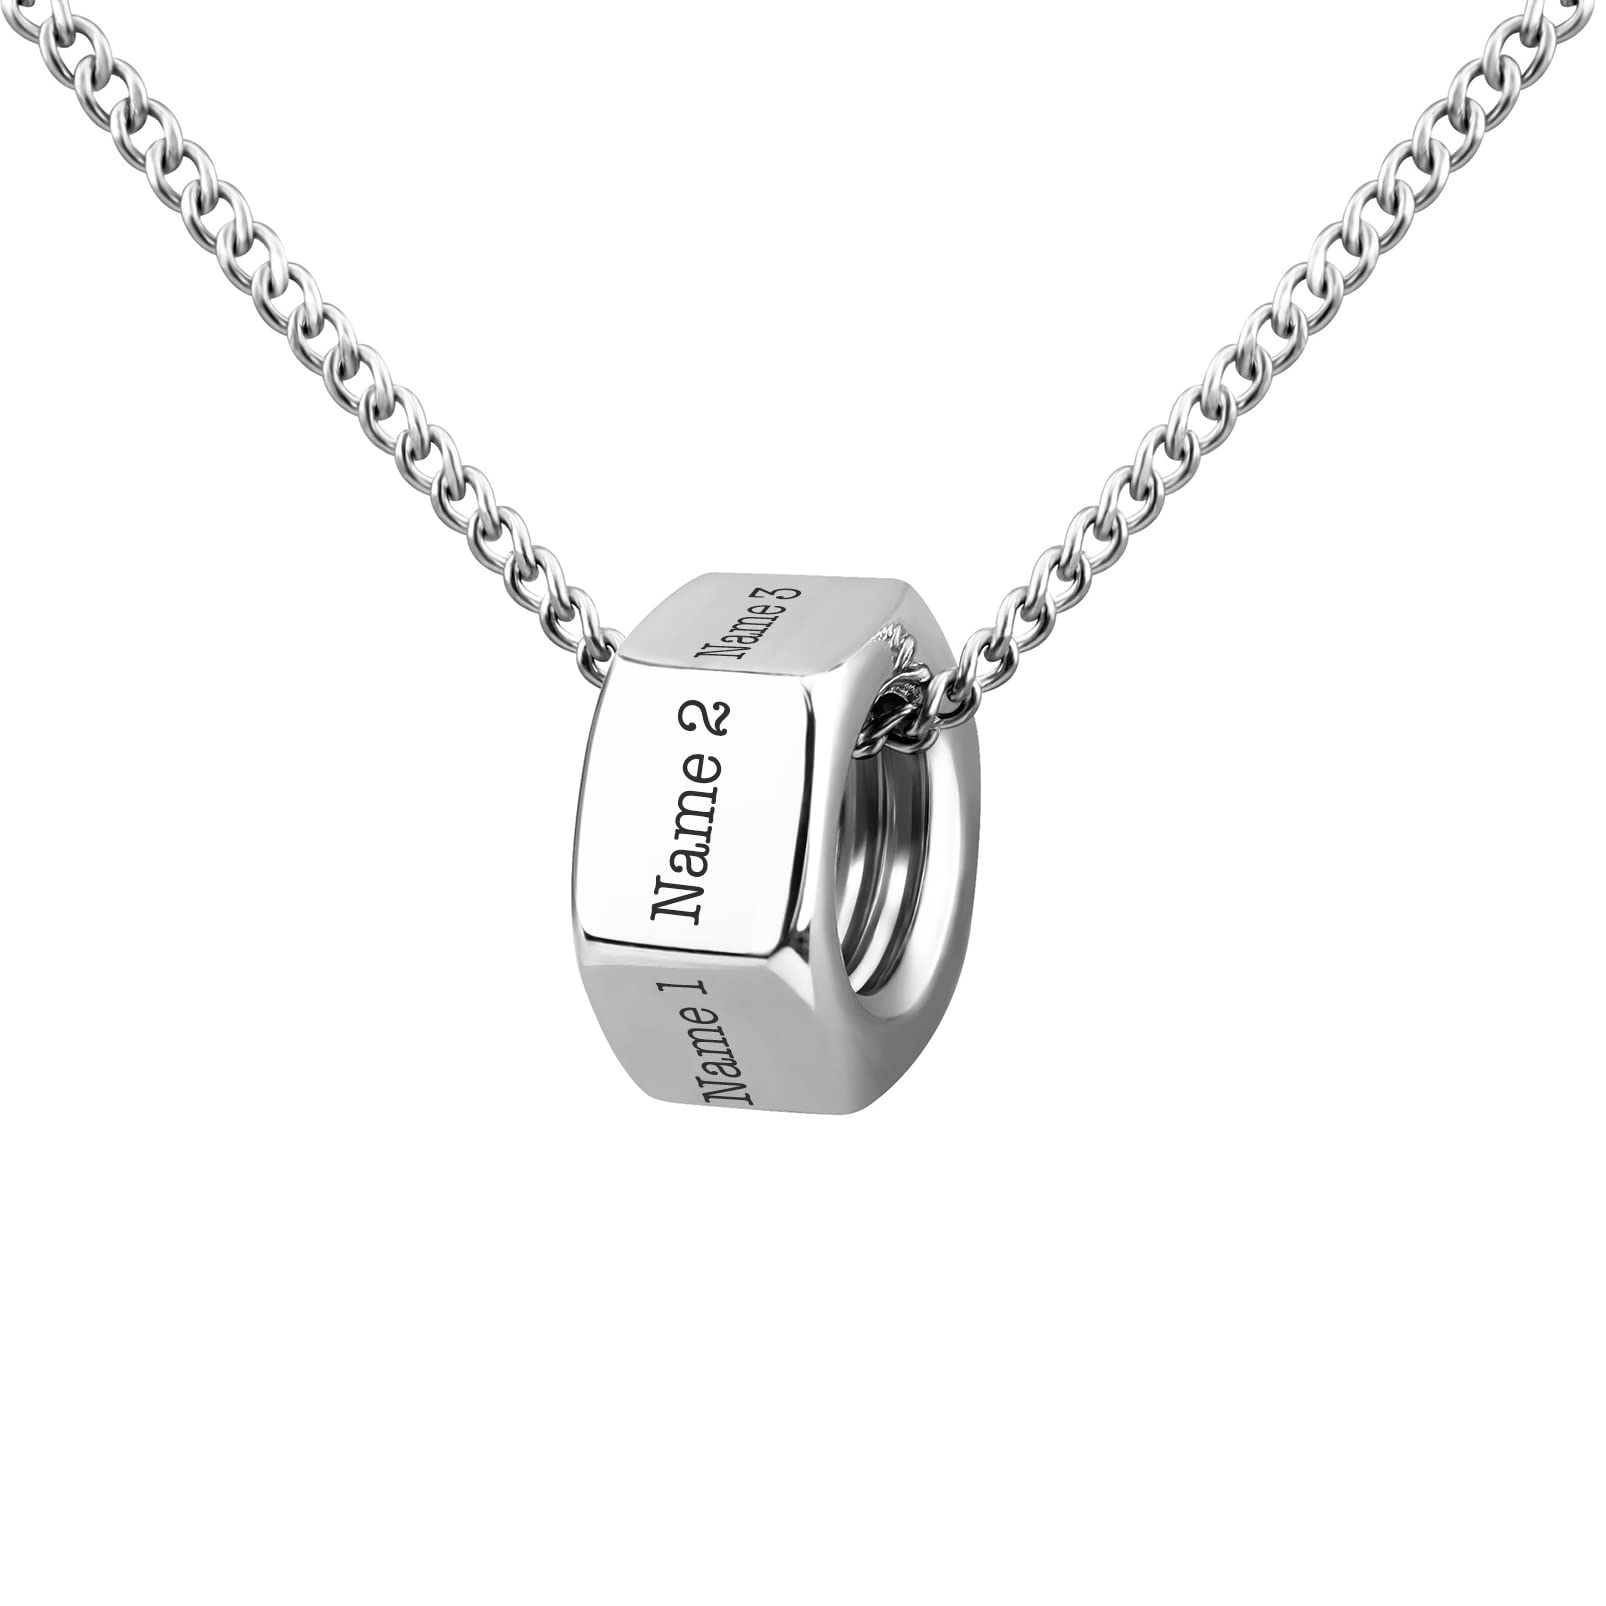 Custom Men‘s Nut Necklace with 3 Names Engraved in Stainless Steel 